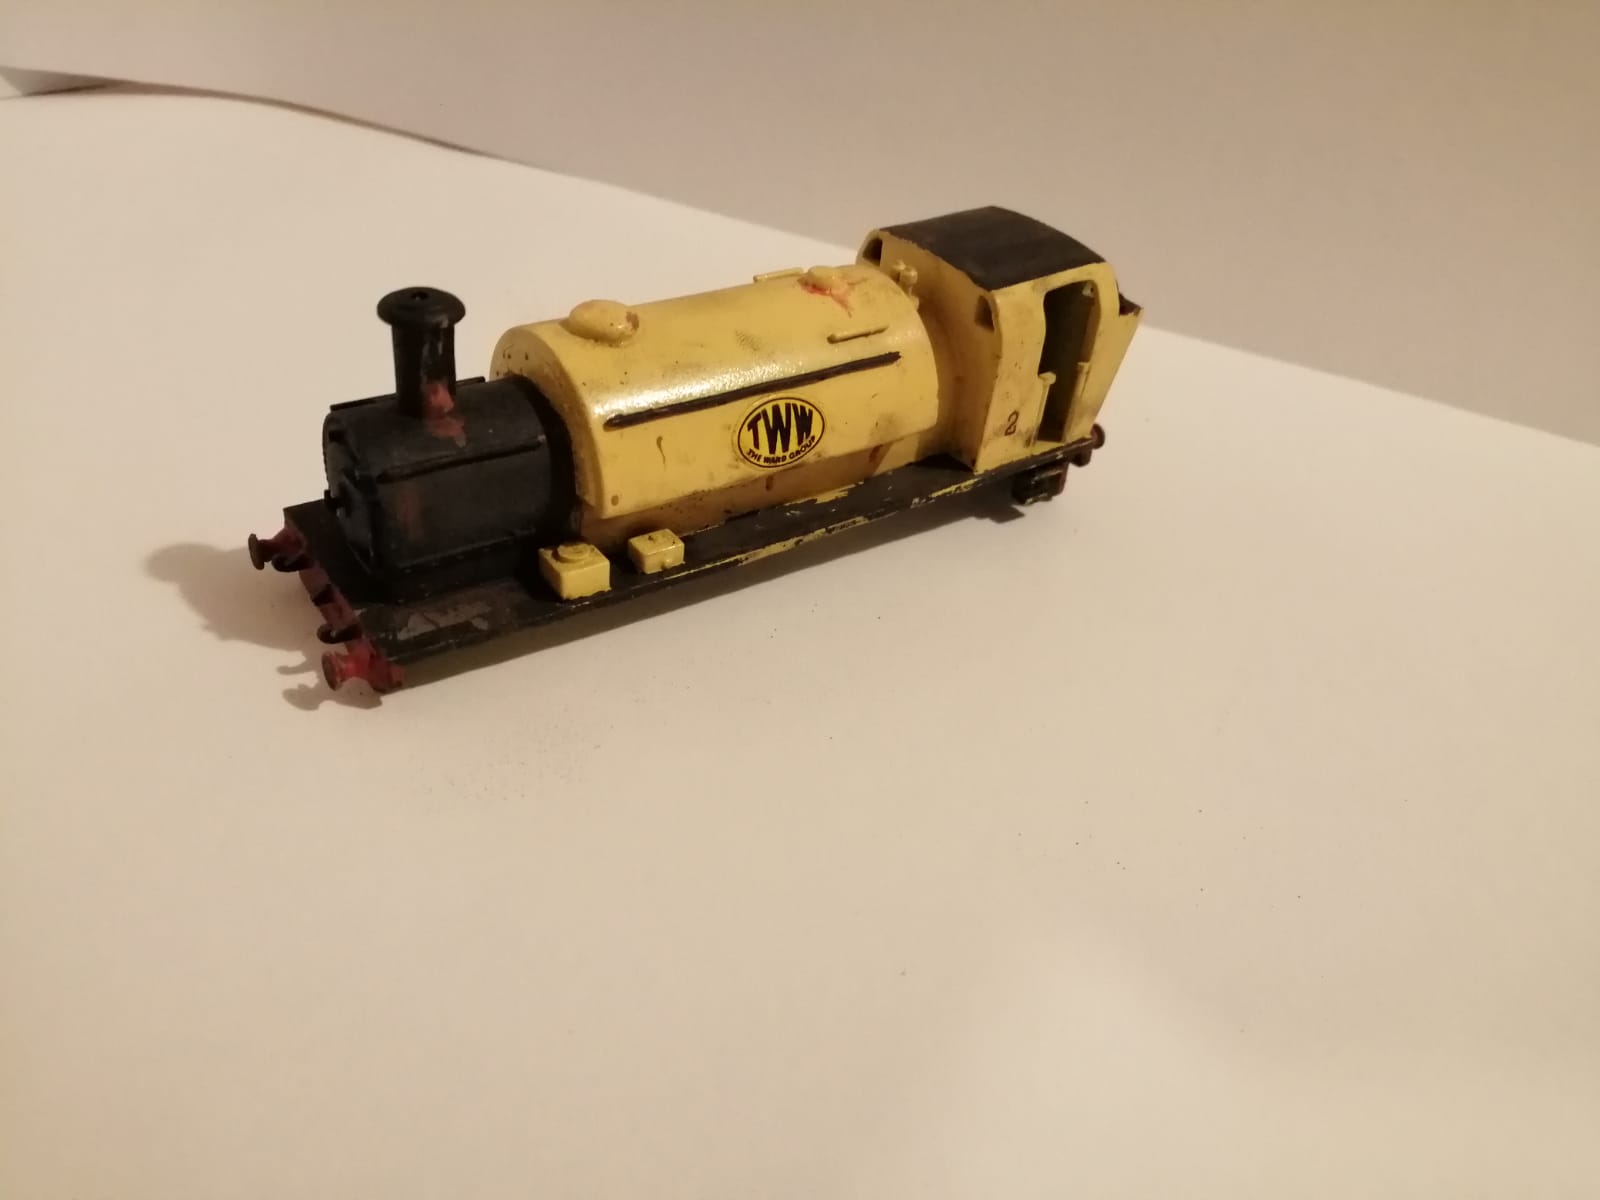 3D printed development locomotive body. Detailed to show finished condition.